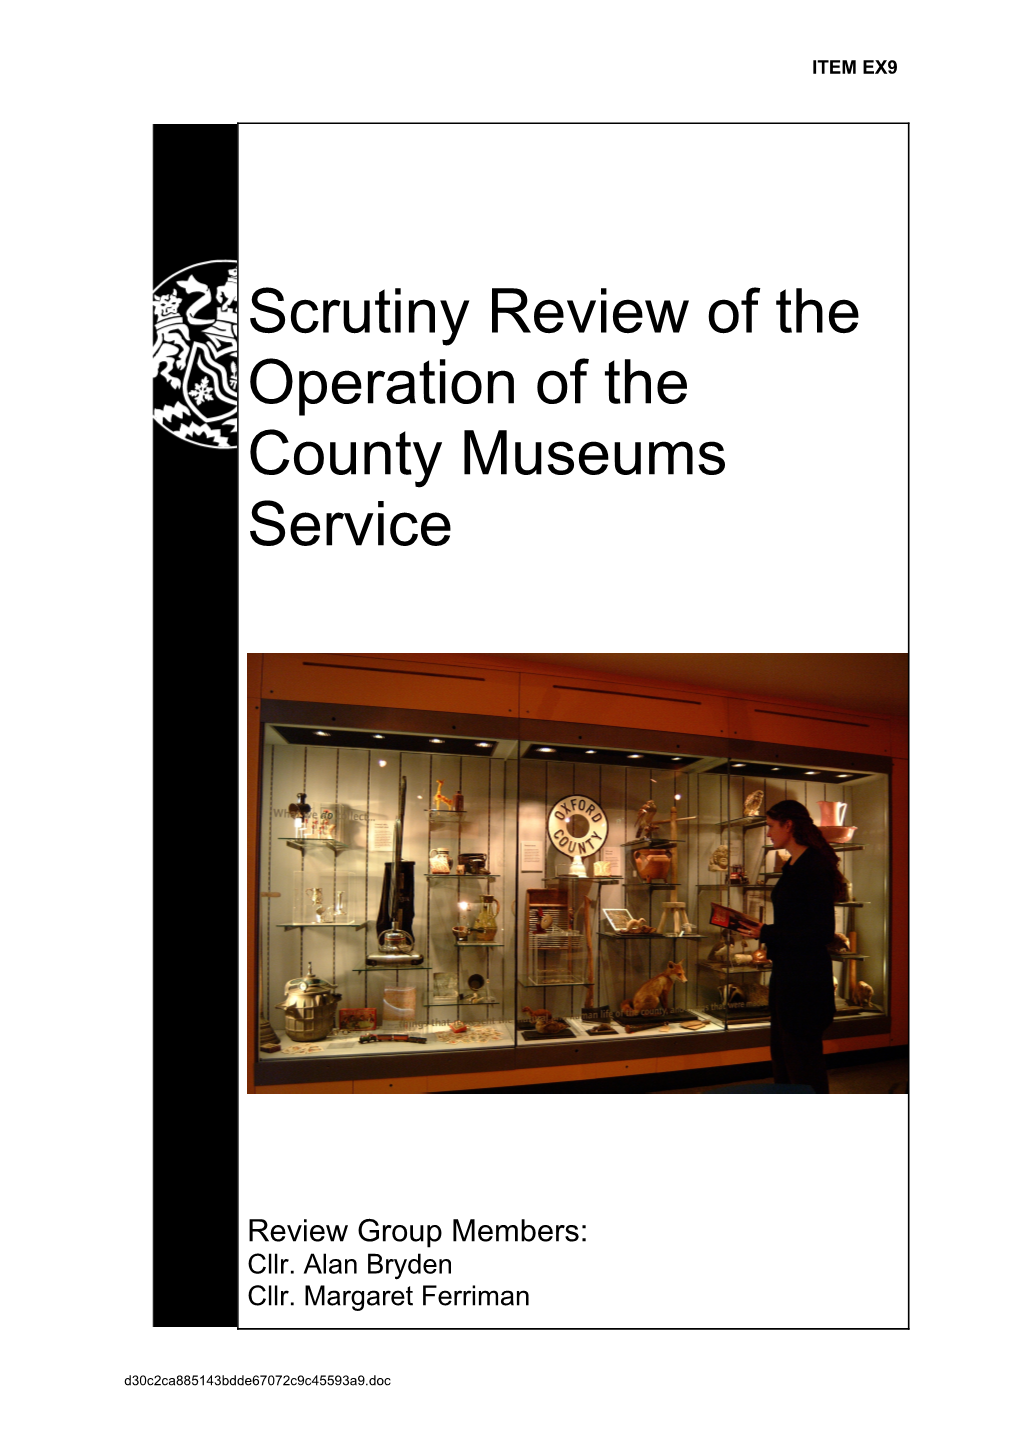 Operation of the County Museums Service